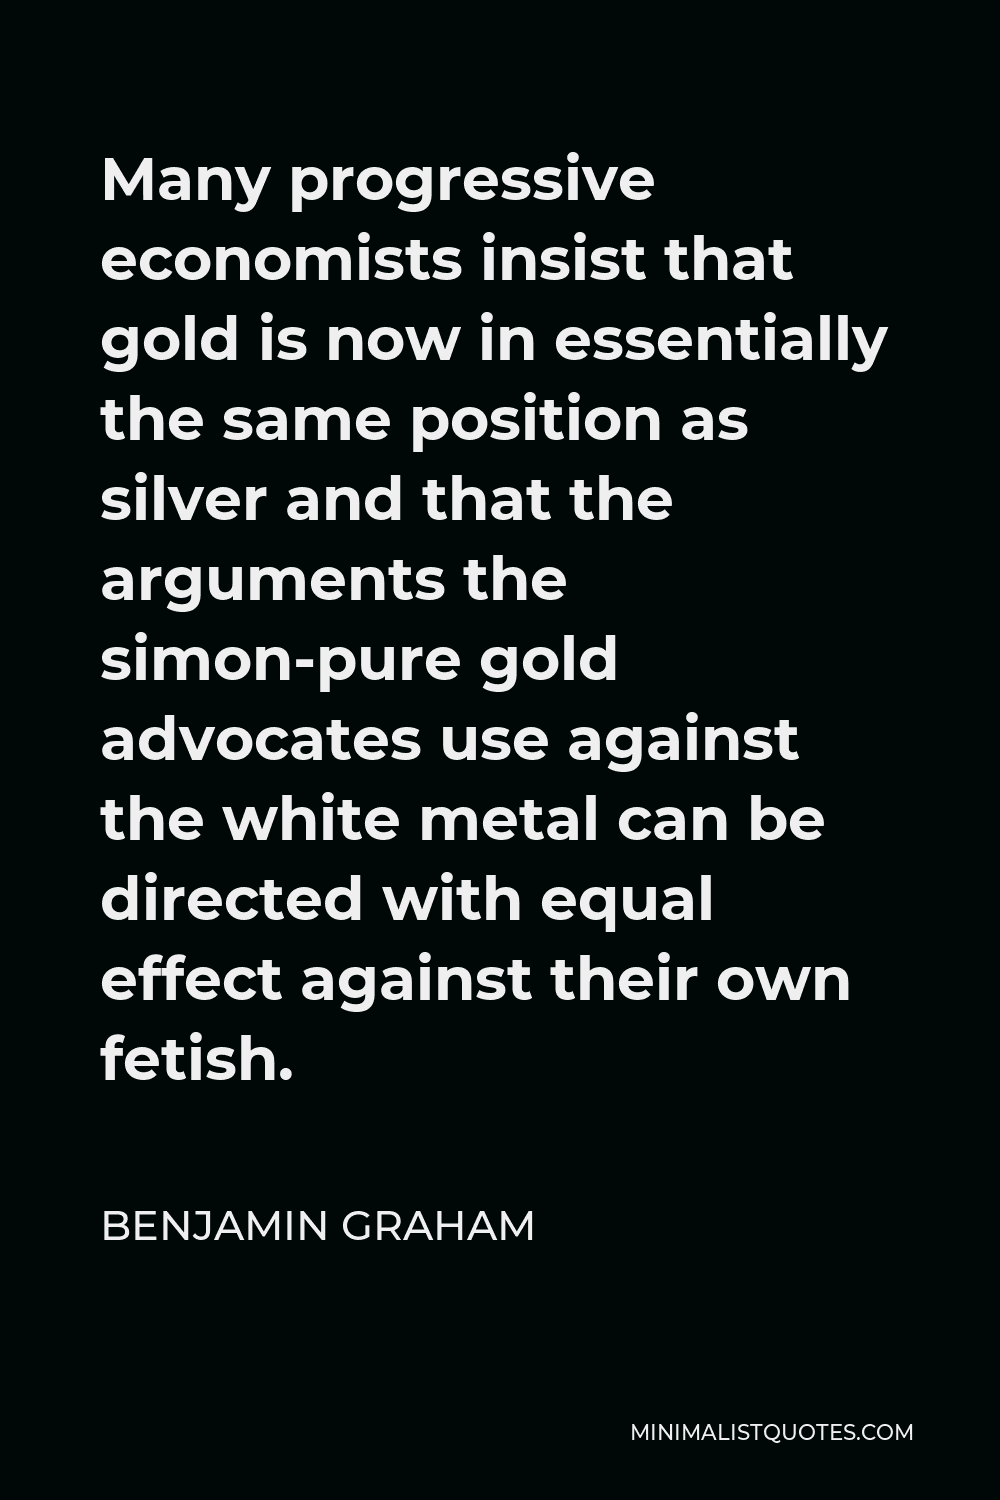 Benjamin Graham Quote - Many progressive economists insist that gold is now in essentially the same position as silver and that the arguments the simon-pure gold advocates use against the white metal can be directed with equal effect against their own fetish.